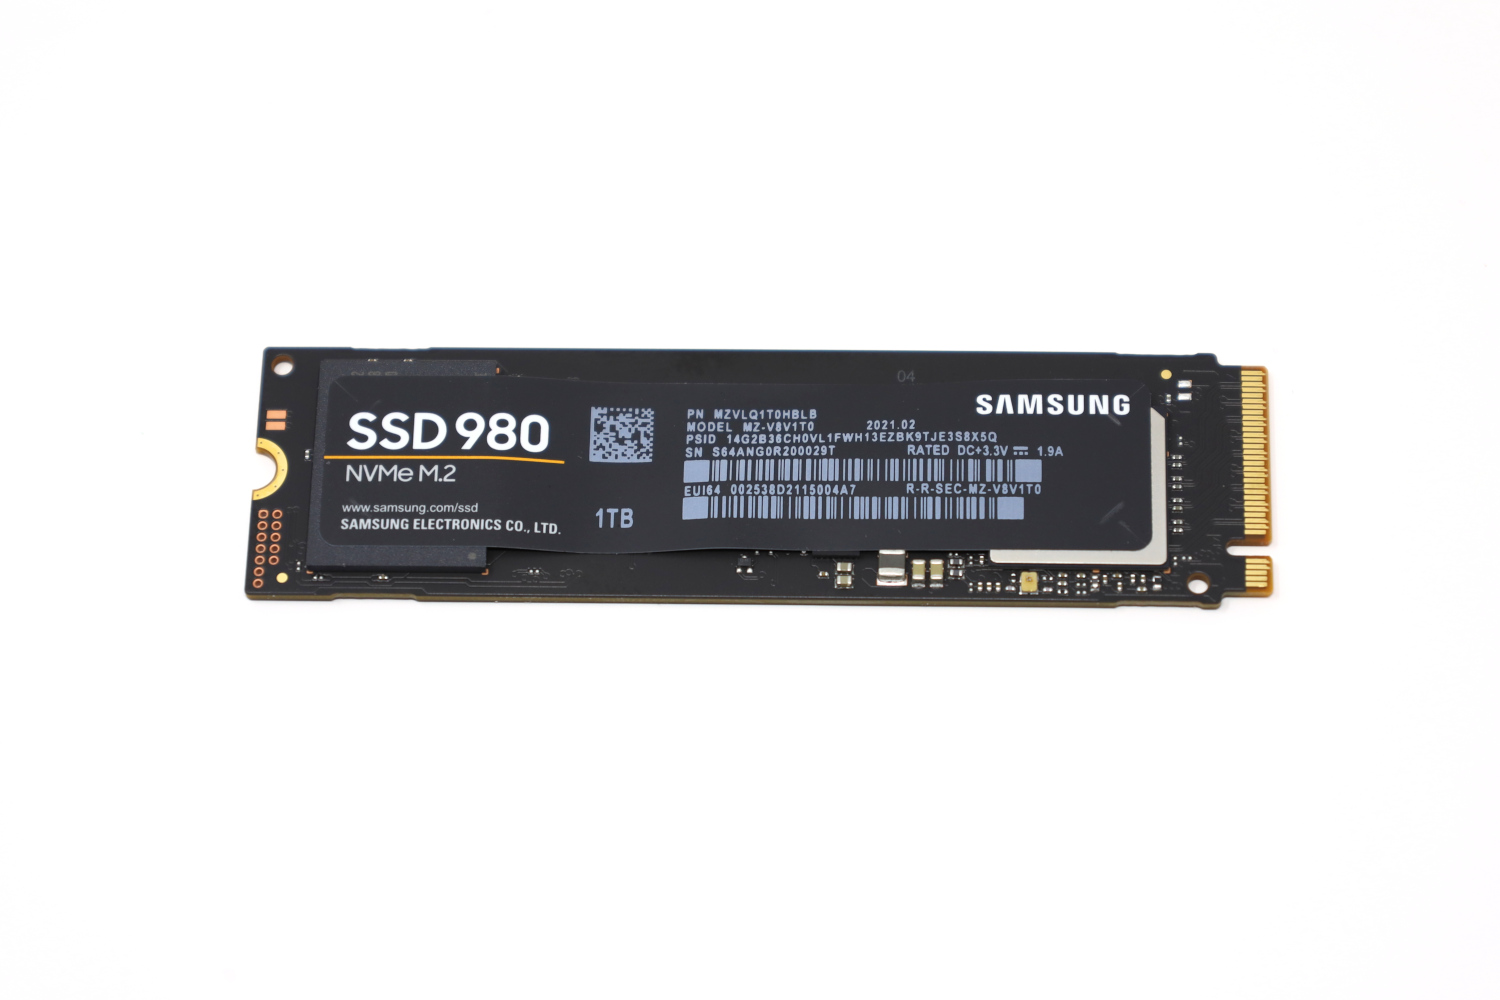 Samsung 980 Pro 1 TB SSD Review - MLC No More - Pictures & Components